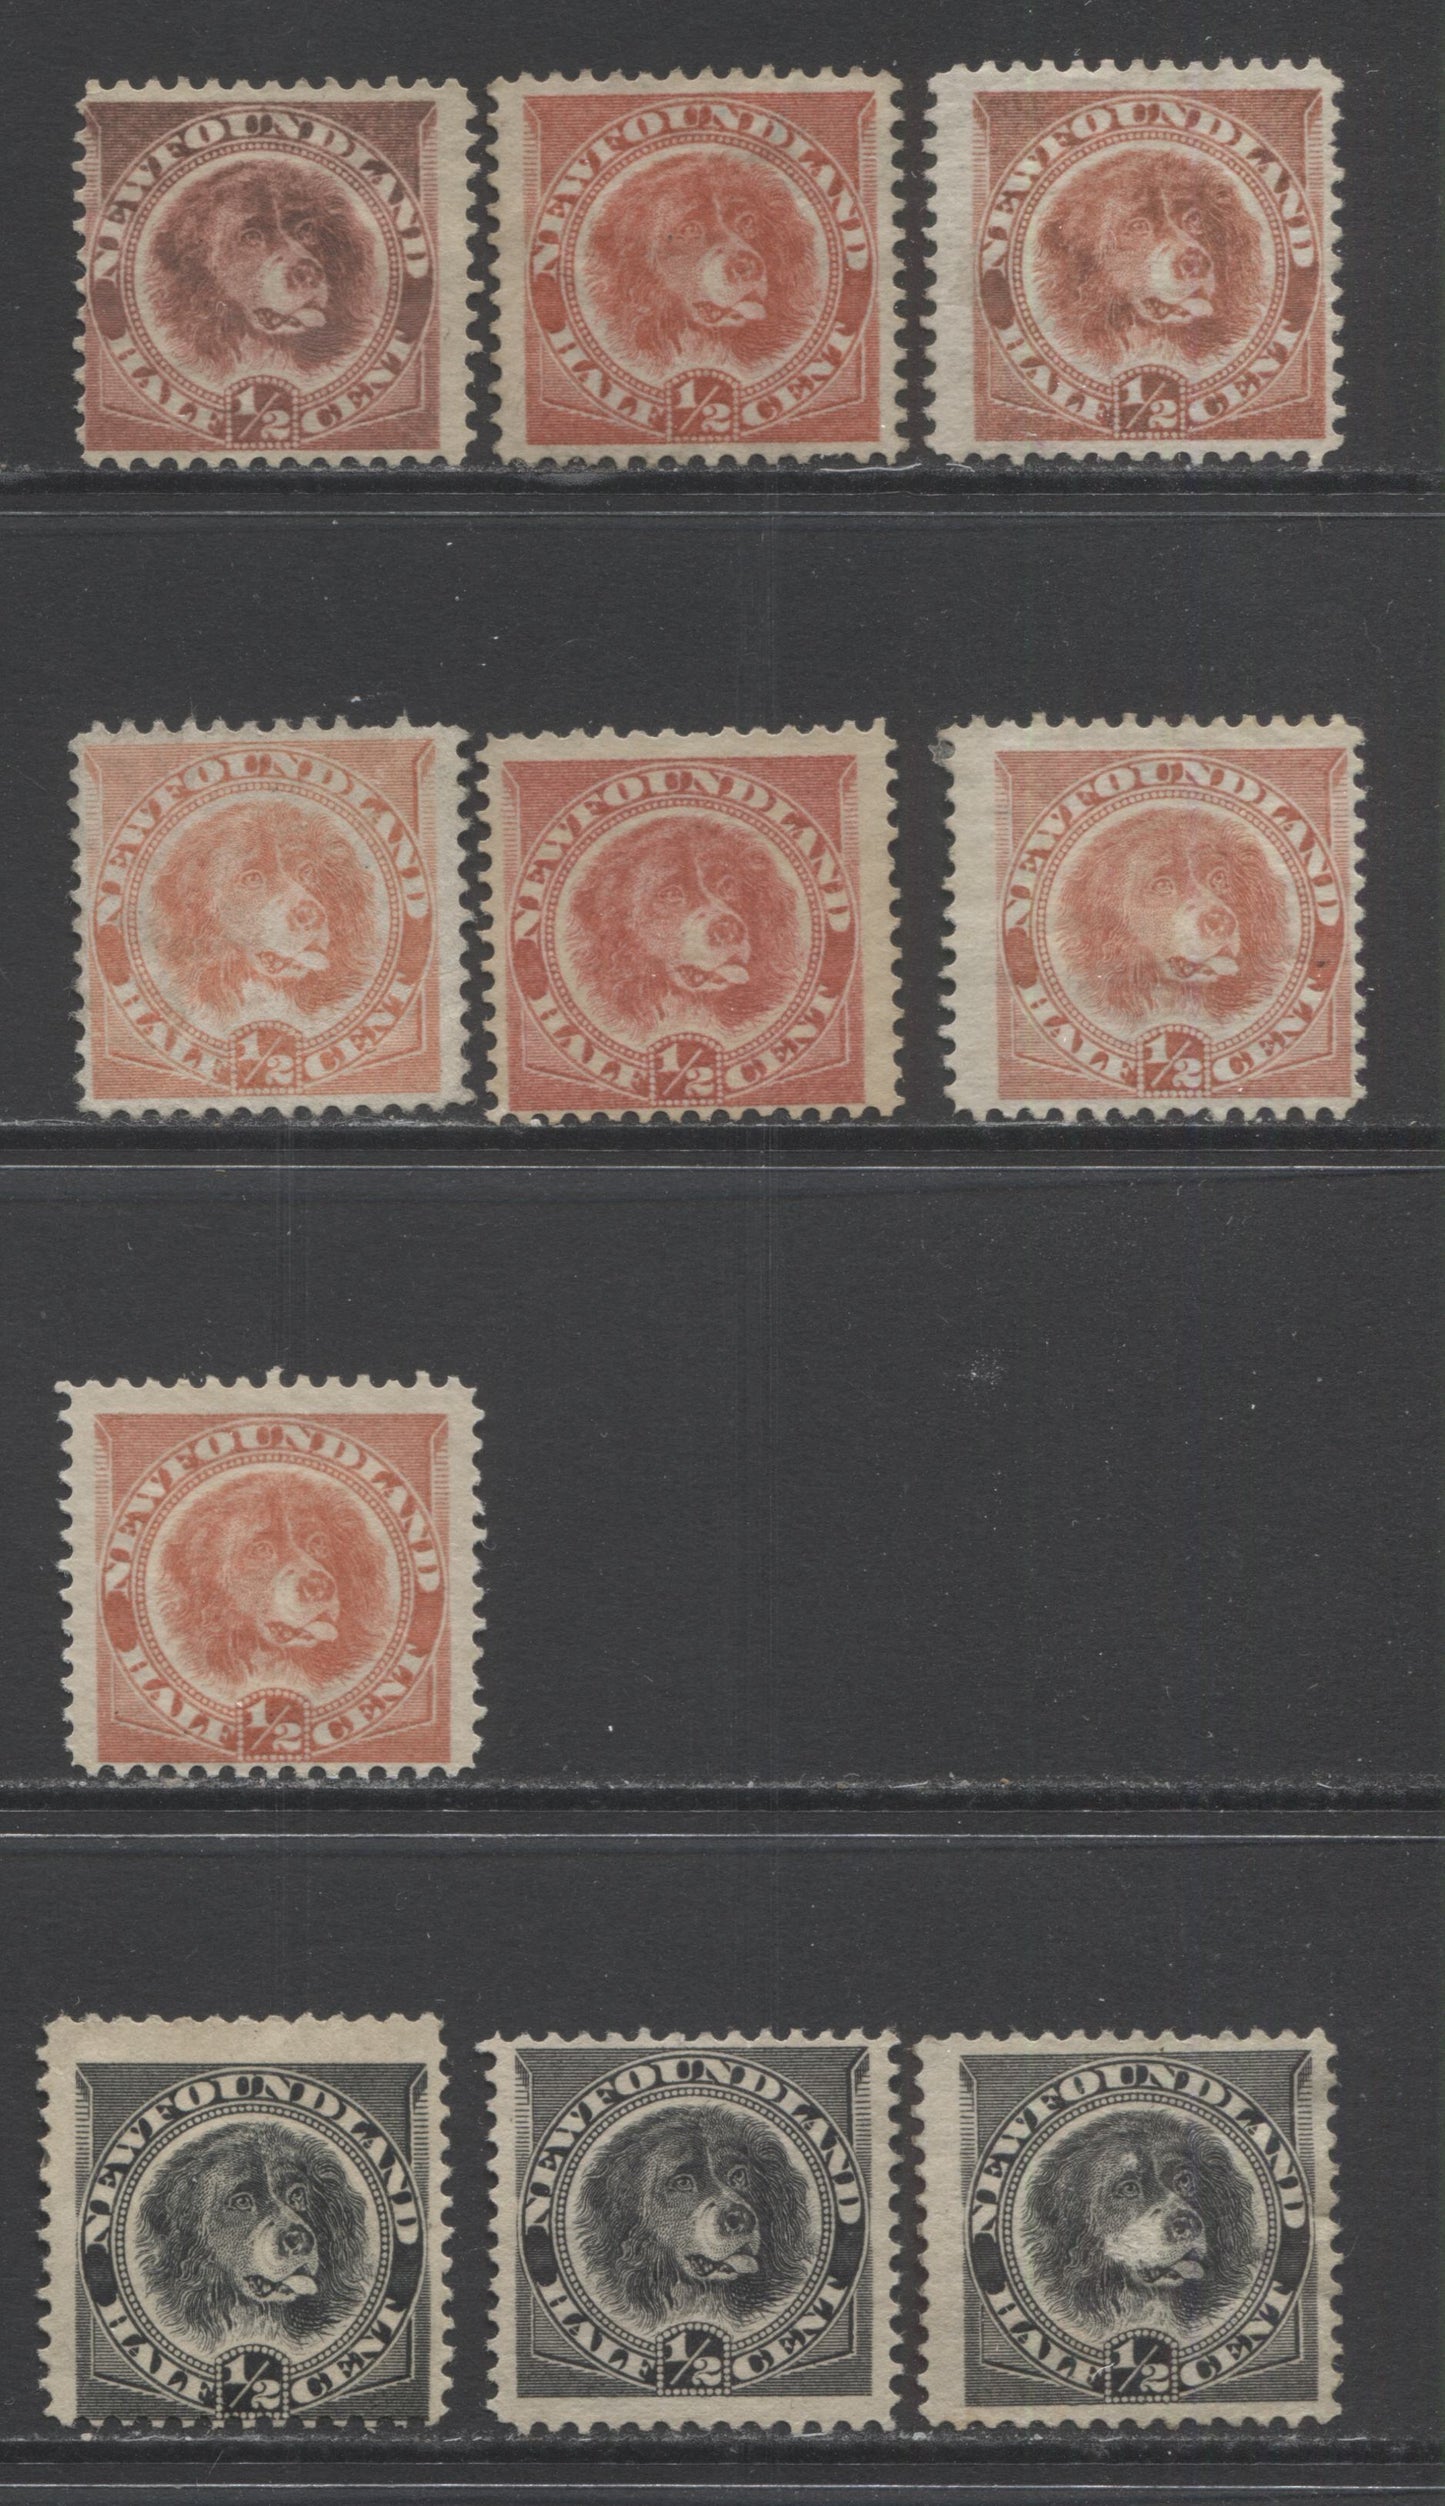 Lot 336 Newfoundland #56, 58 1/2c Rose Red & Black Newfoundland Dog, 1887-1898 Third Cents Issue, 9 Good - Fine Unused Singles, A Study Lot Showing Different Shades Of Black & Rose Red & Papers